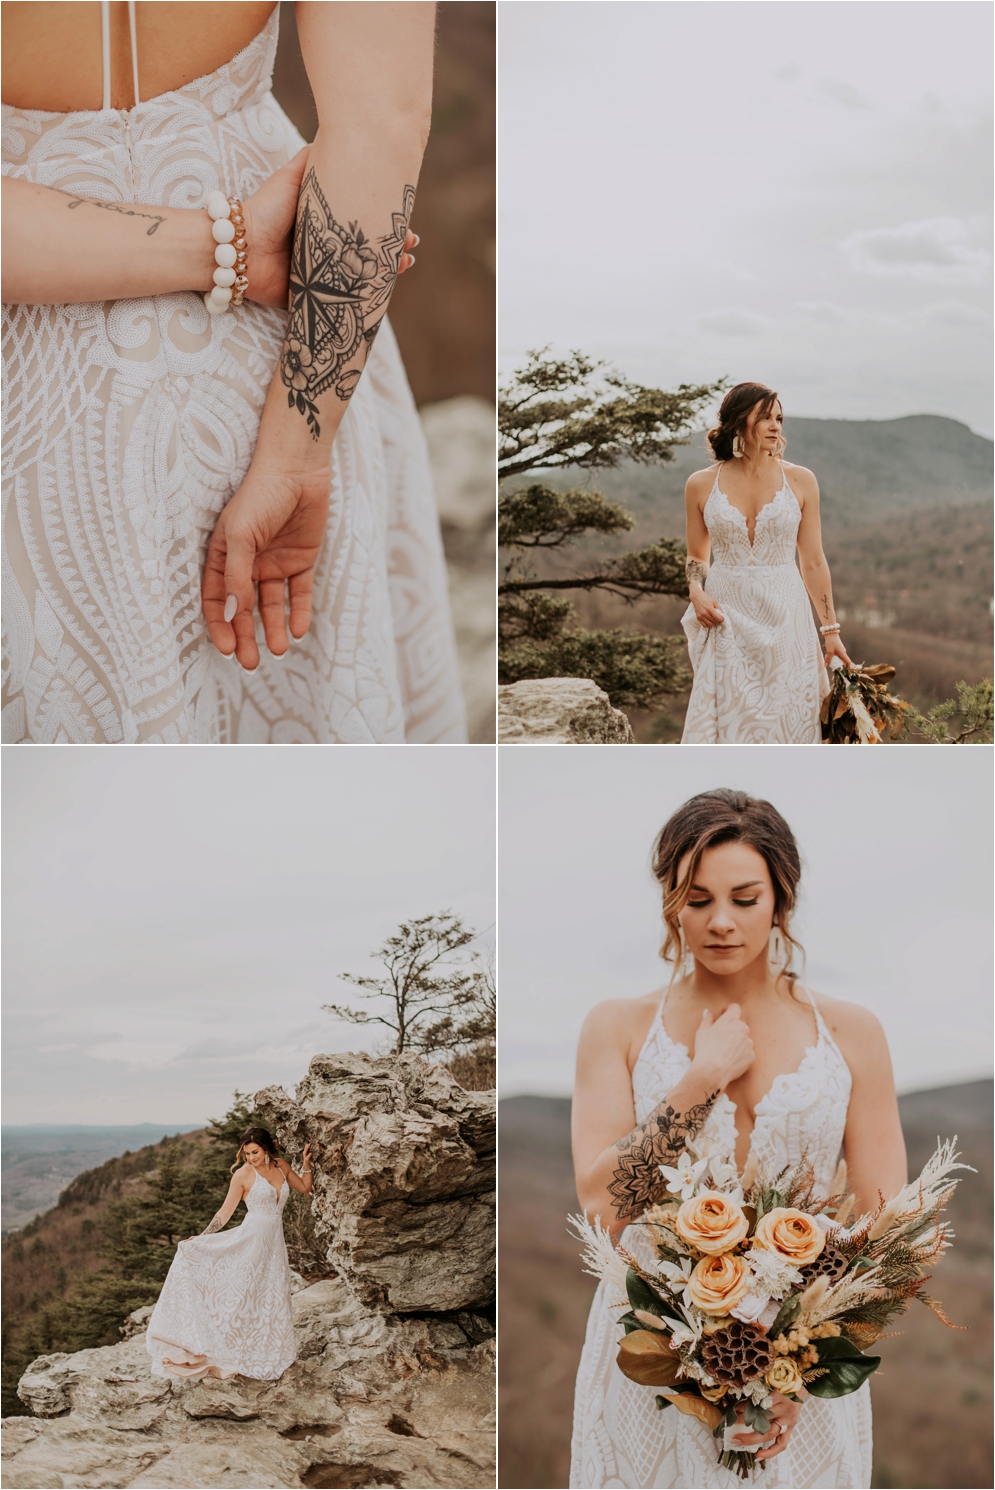 Hanging Rock State Park, Hayley Paige Wedding Dress, Southern Blooms, Carbon Compass Beauty Bar, Wildflower Bridal, Modern Boho Bride, Bohemian Bride, Bridals, See You Clayter, Connection Photography, Asheville Wedding Photographer, Adventurous Wedding Photographer, Charlotte Wedding Photographer, bridal portraits, bride with tatttoos